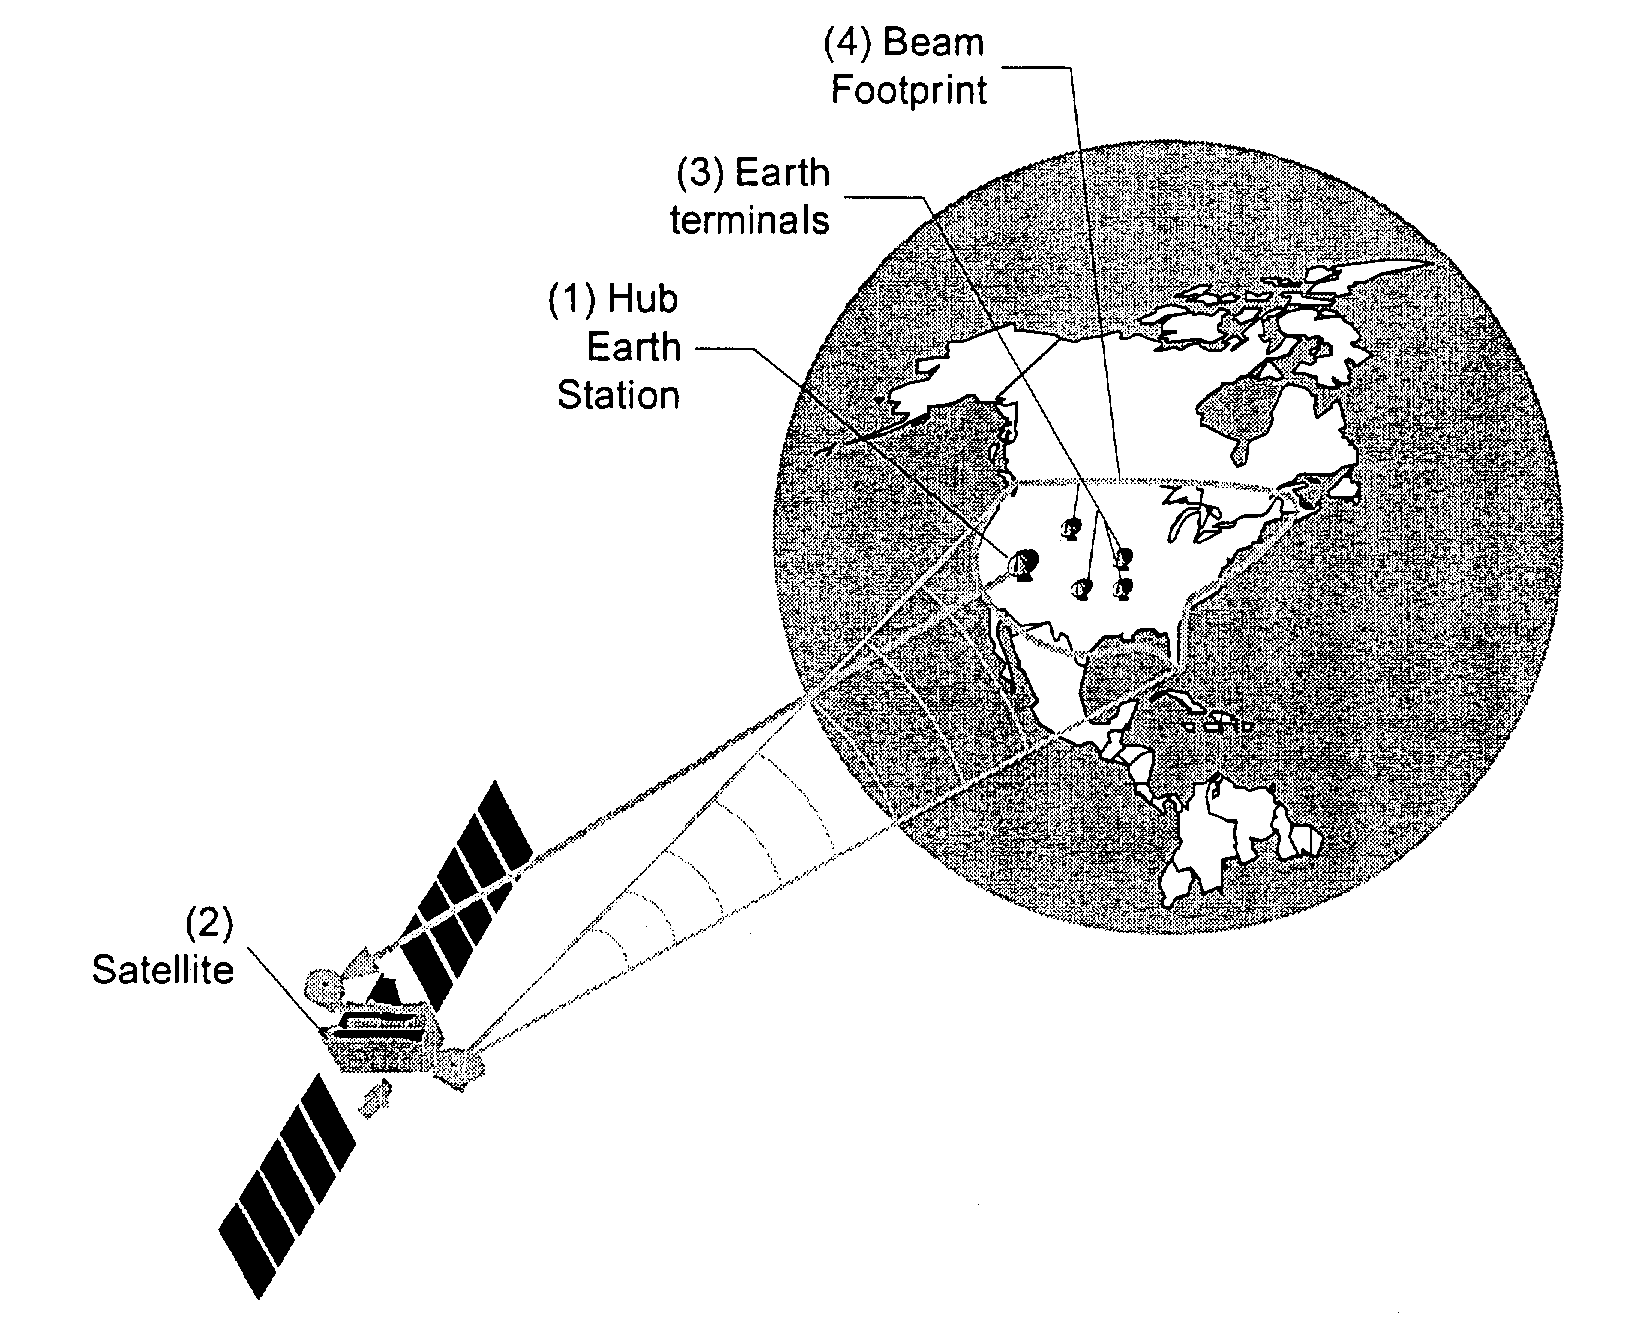 Wideband direct-to-home broadcasting satellite communications system and method